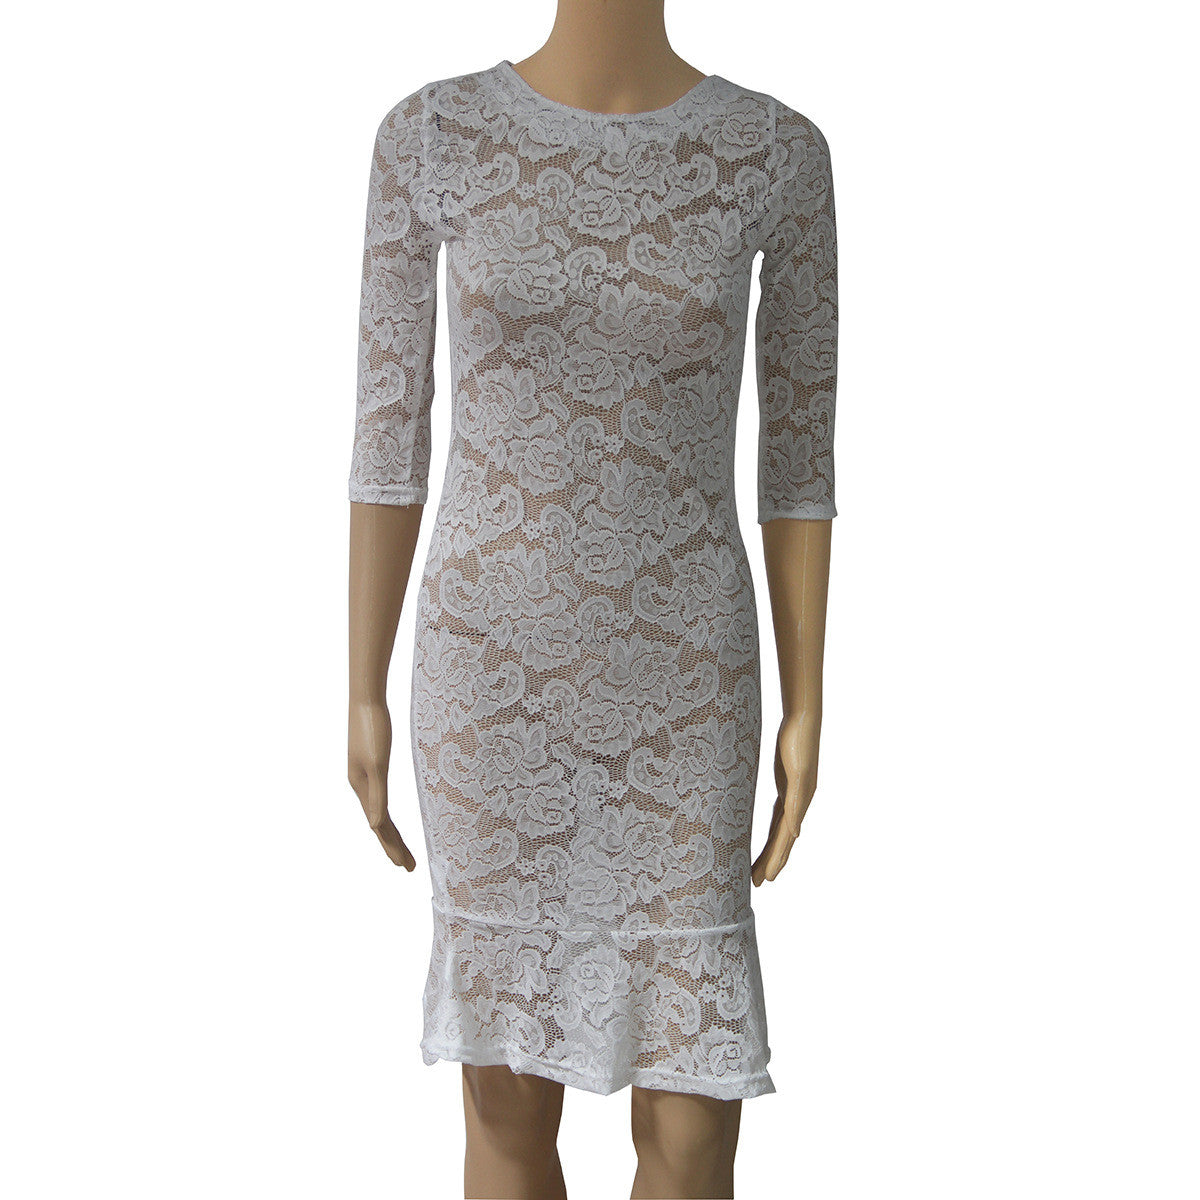 White Lace 1/2 Sleeve Perspective Short Bodycon Dress - Oh Yours Fashion - 5